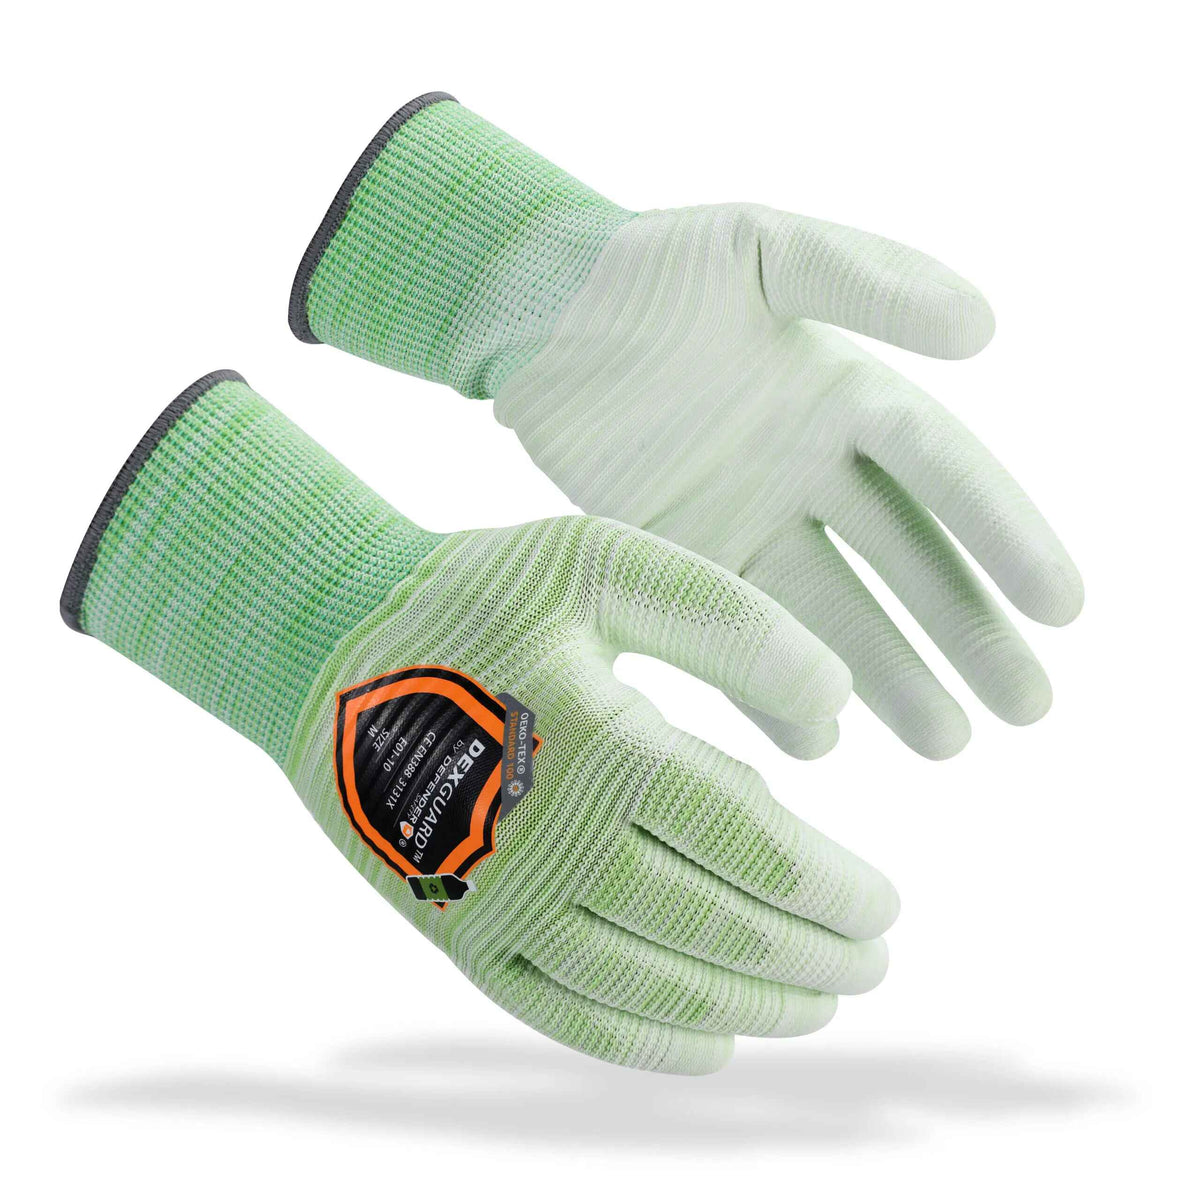 https://defendersafety.com/cdn/shop/products/dexguard-13g-recycled-polyester-knit-liner-rainbow-green-gloves-abrasion-resistant-level-3-polyurethane-coating-433536.jpg?crop=center&height=1200&v=1690825158&width=1200